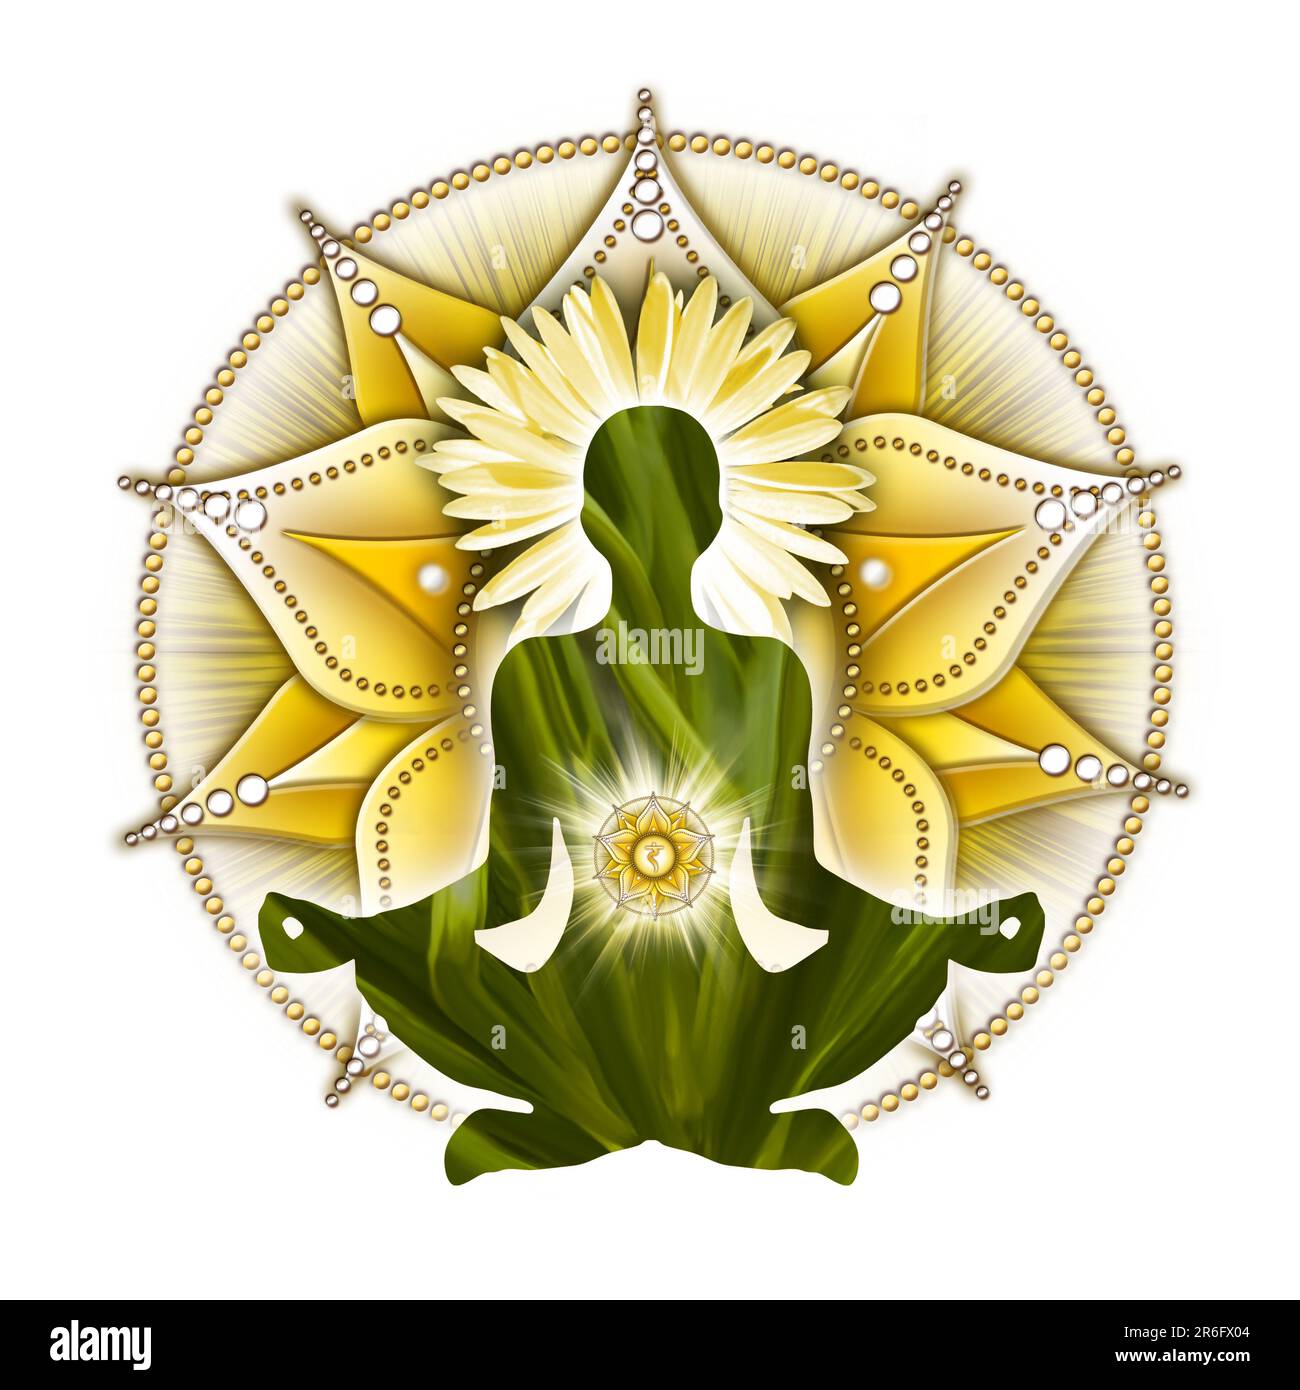 What is the Solar Plexus Chakra? Mantras, Meditations, and Side Effects